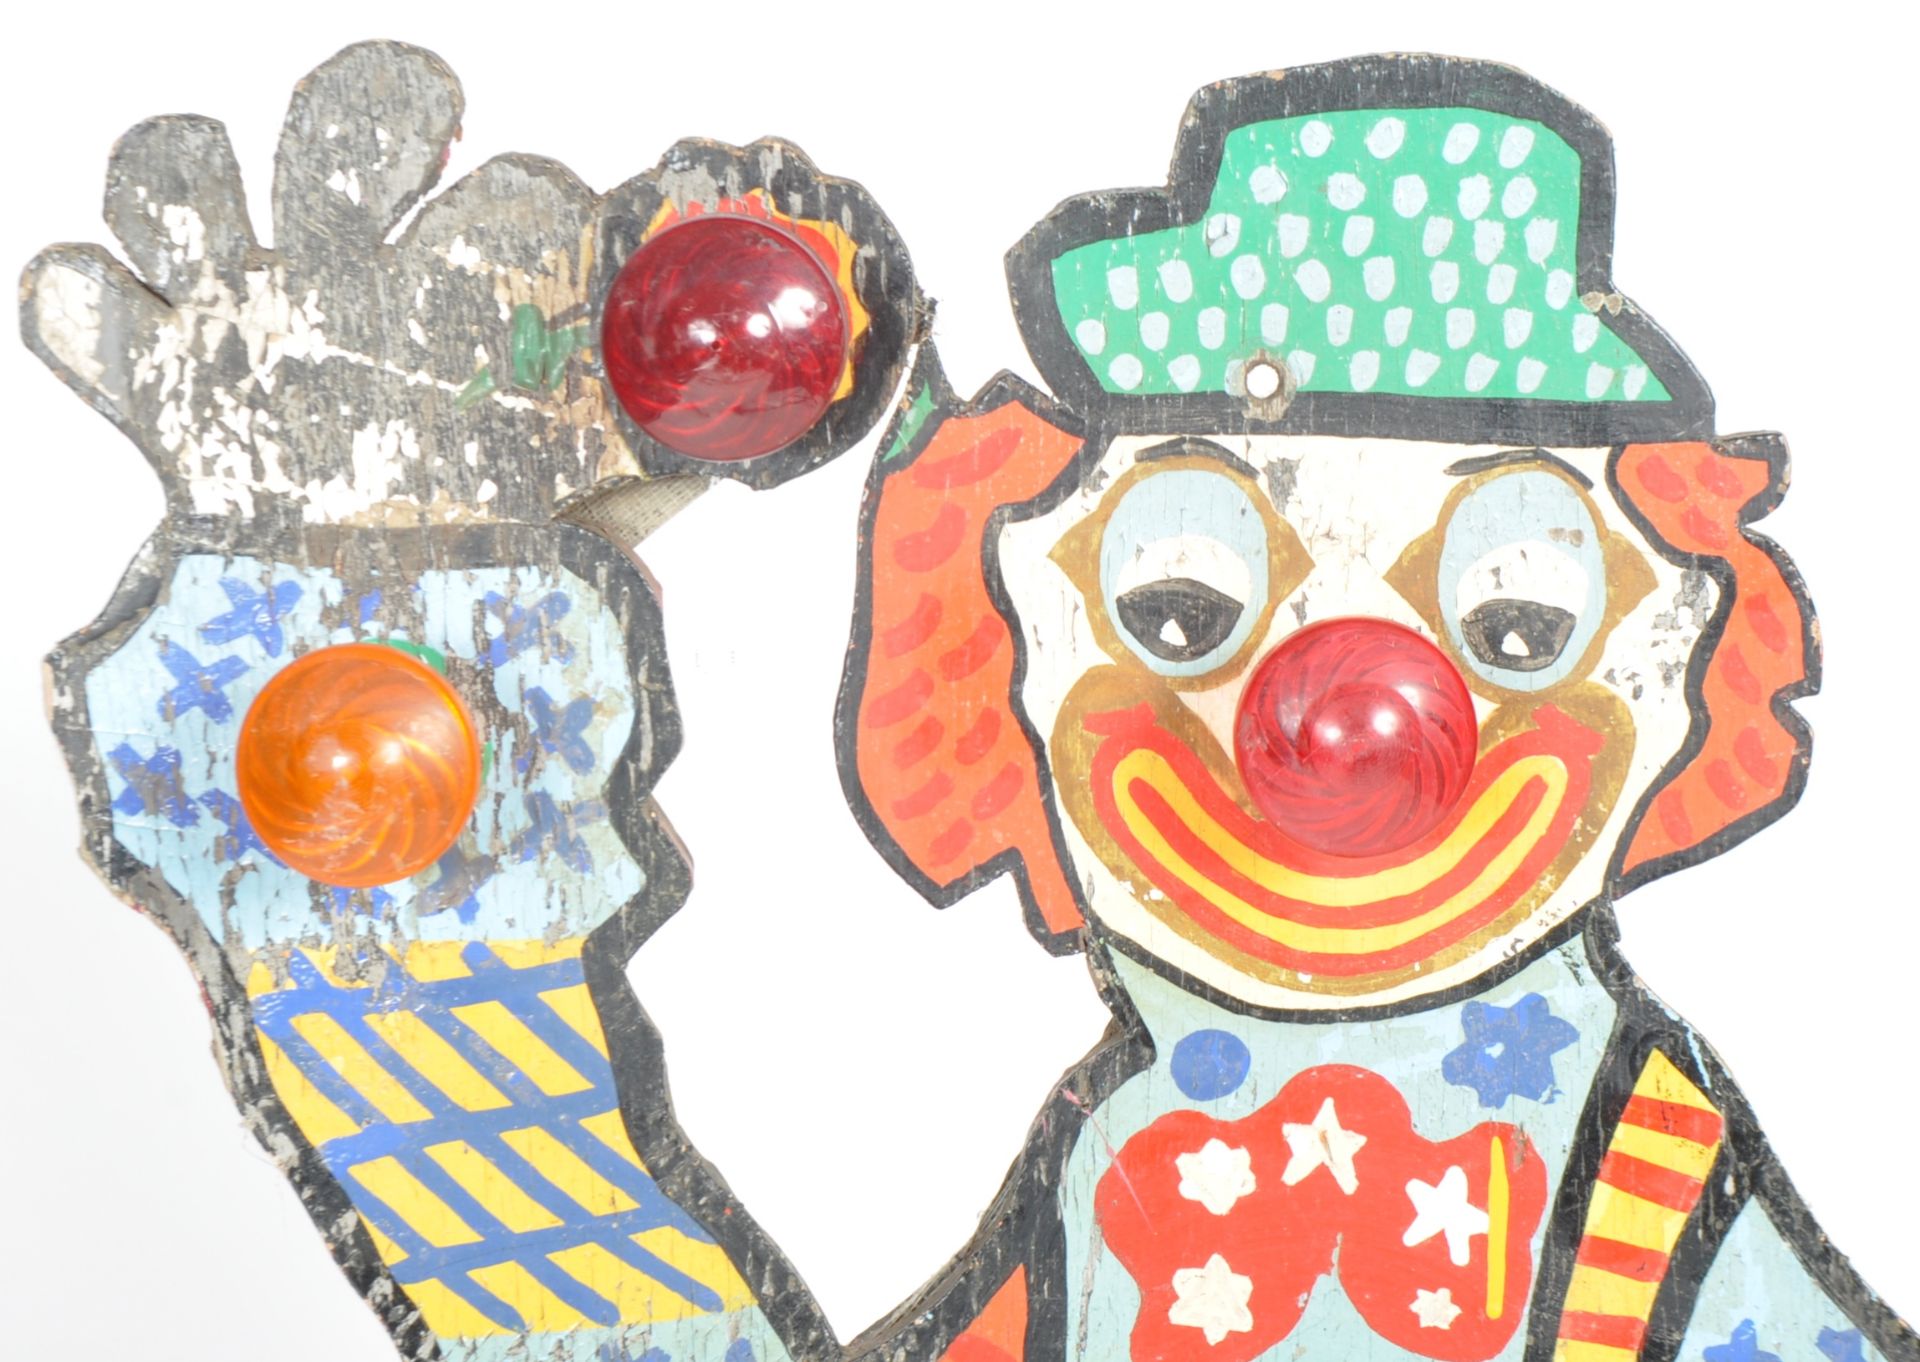 VINTAGE HAND PAINTED FAIRGROUND WOODEN CLOWN DISPLAY - Image 2 of 4